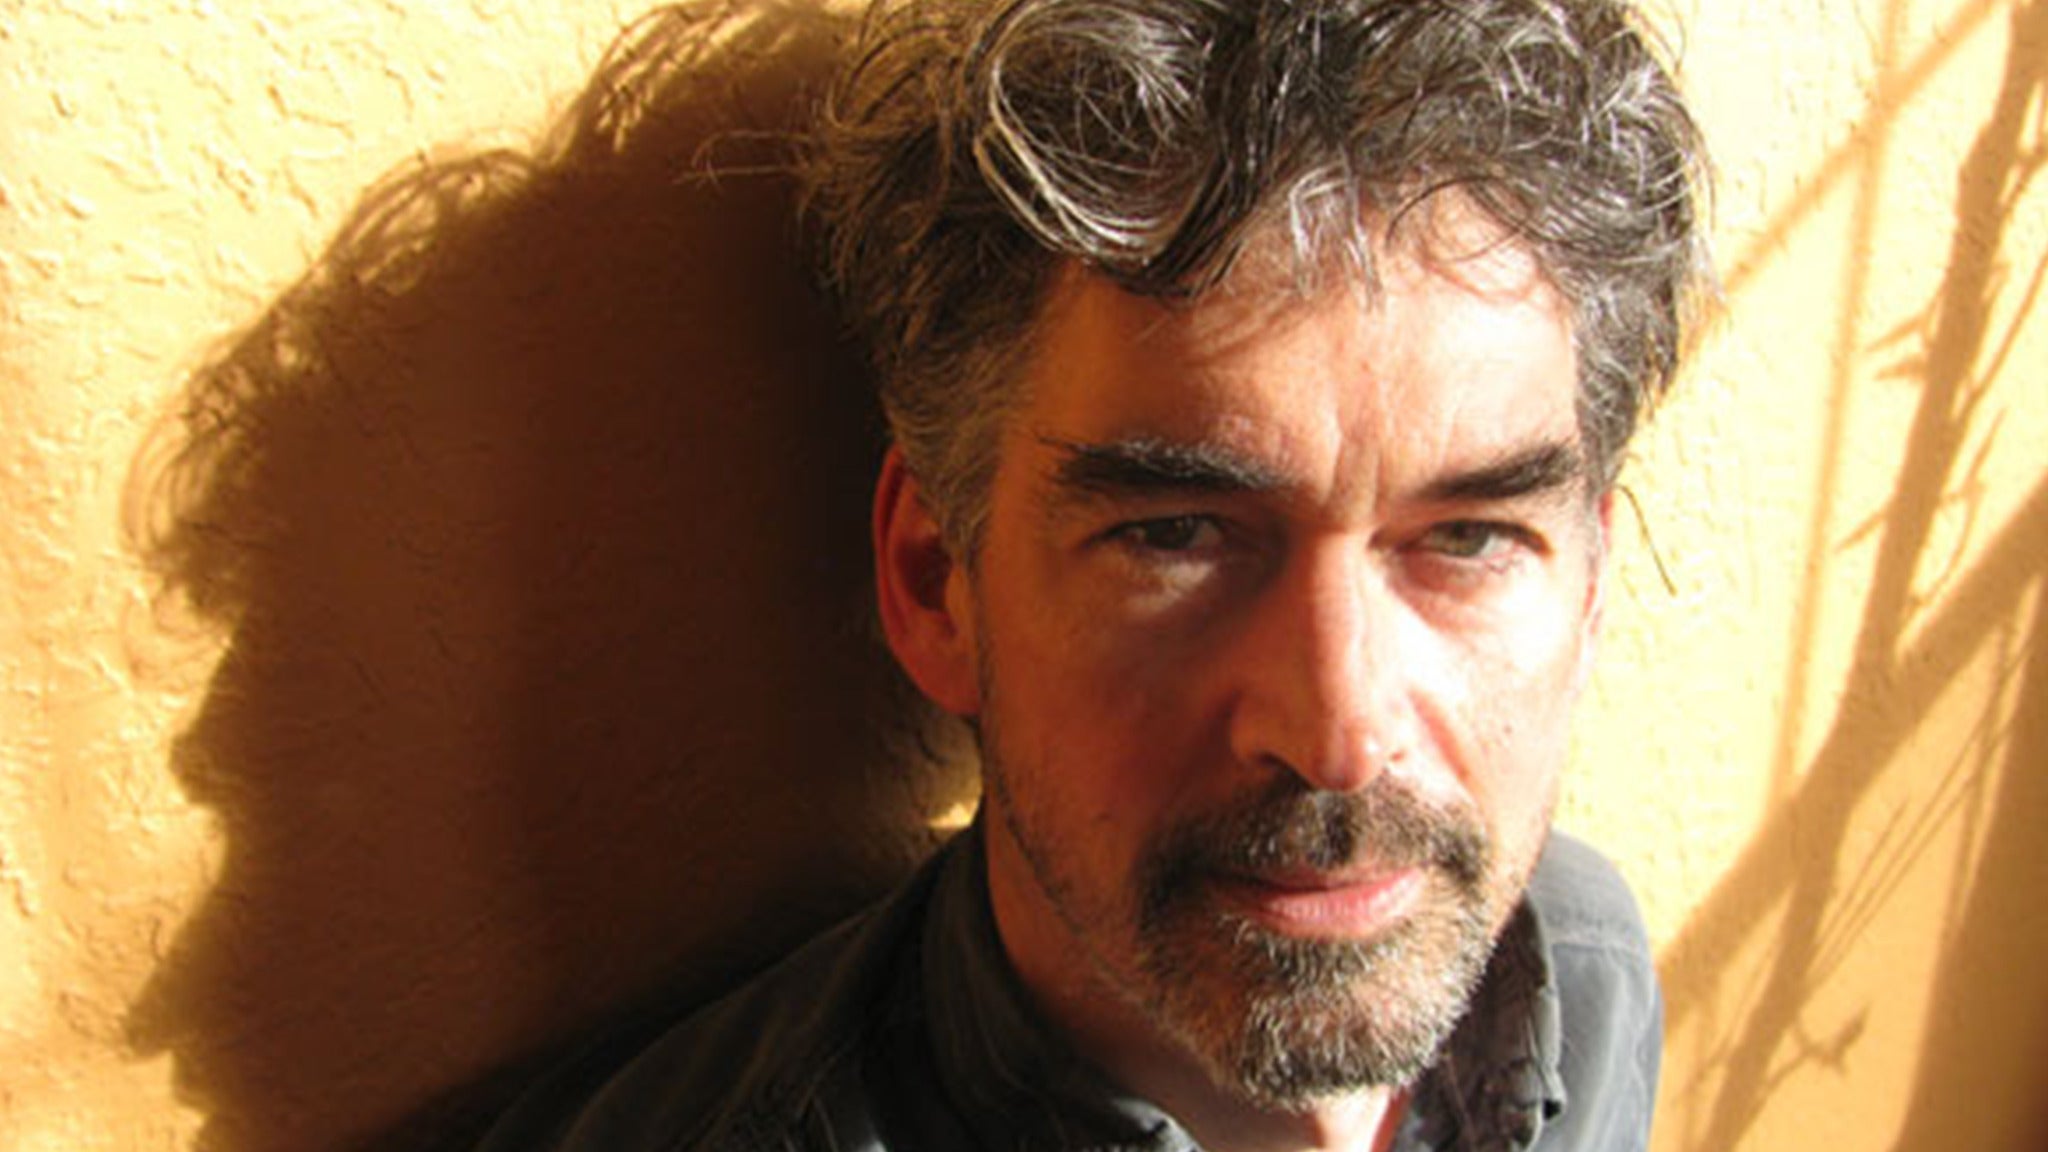 An Evening With Slaid Cleaves at Club Cafe